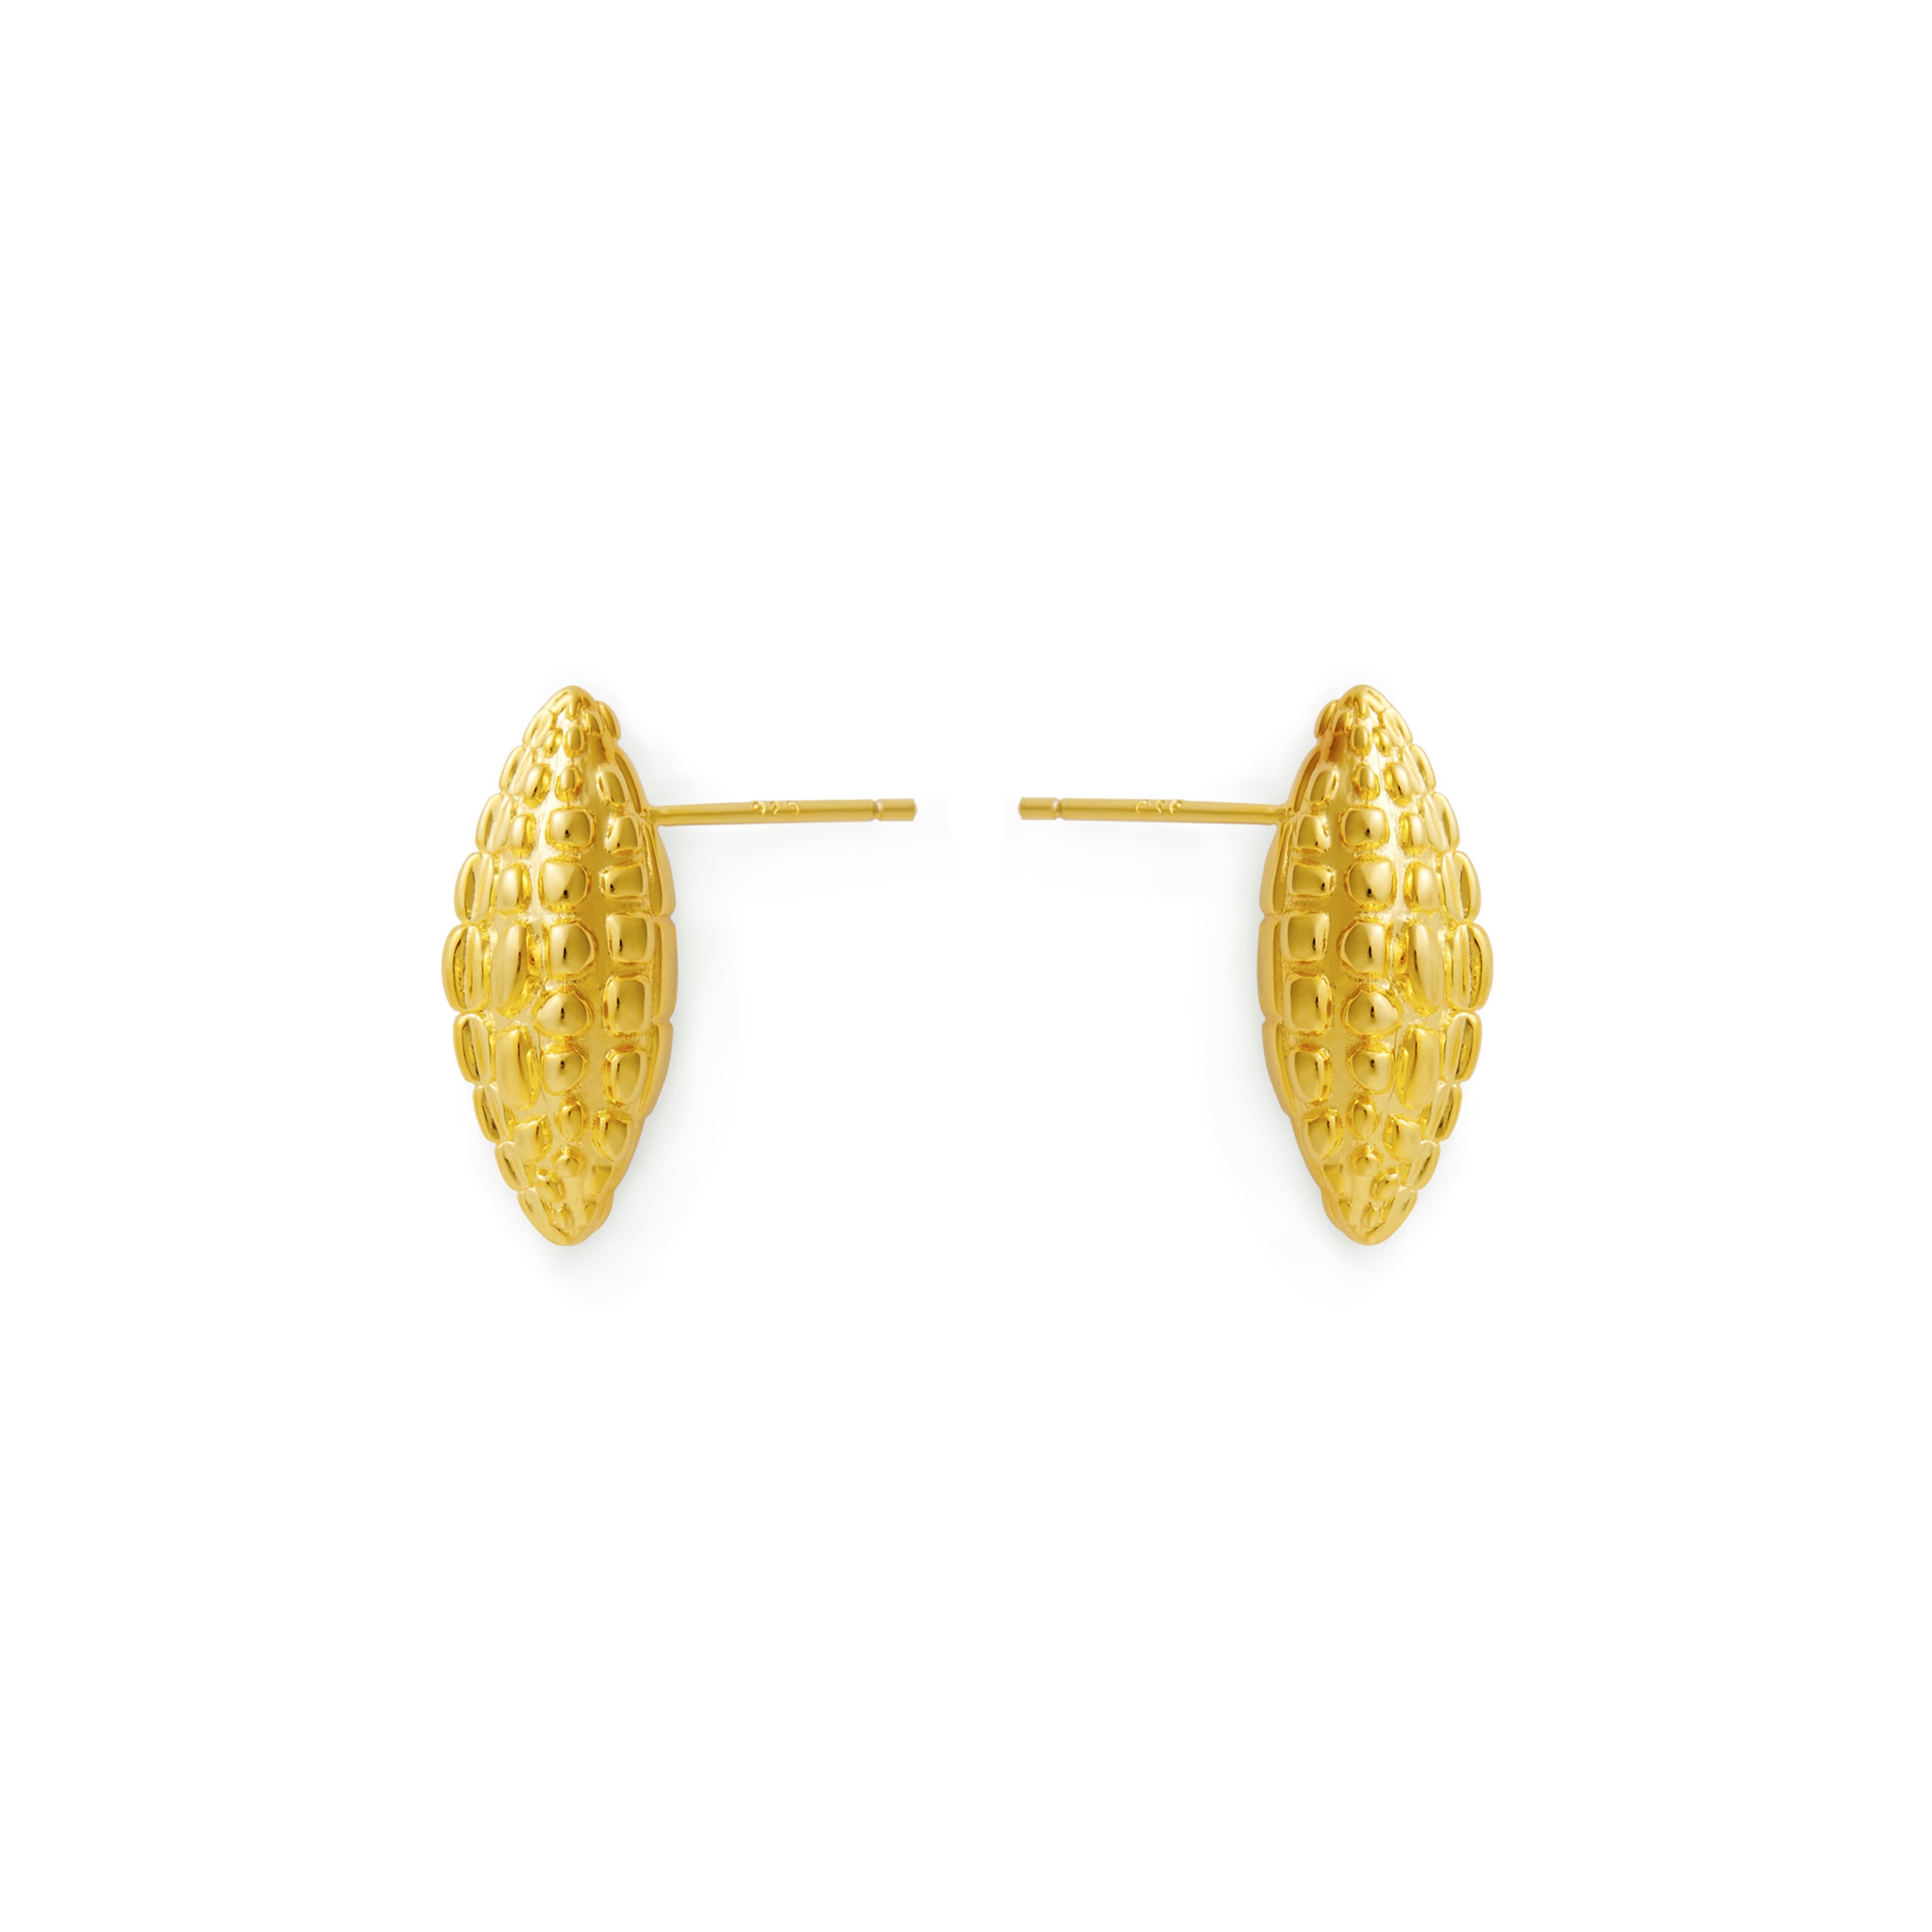 Mistova's Danger eye earrings are made from the finest 18K gold. Inspired by the protective armor of the skin of the crocodile. These earrings add strength and attitude to ones jewelry collection.